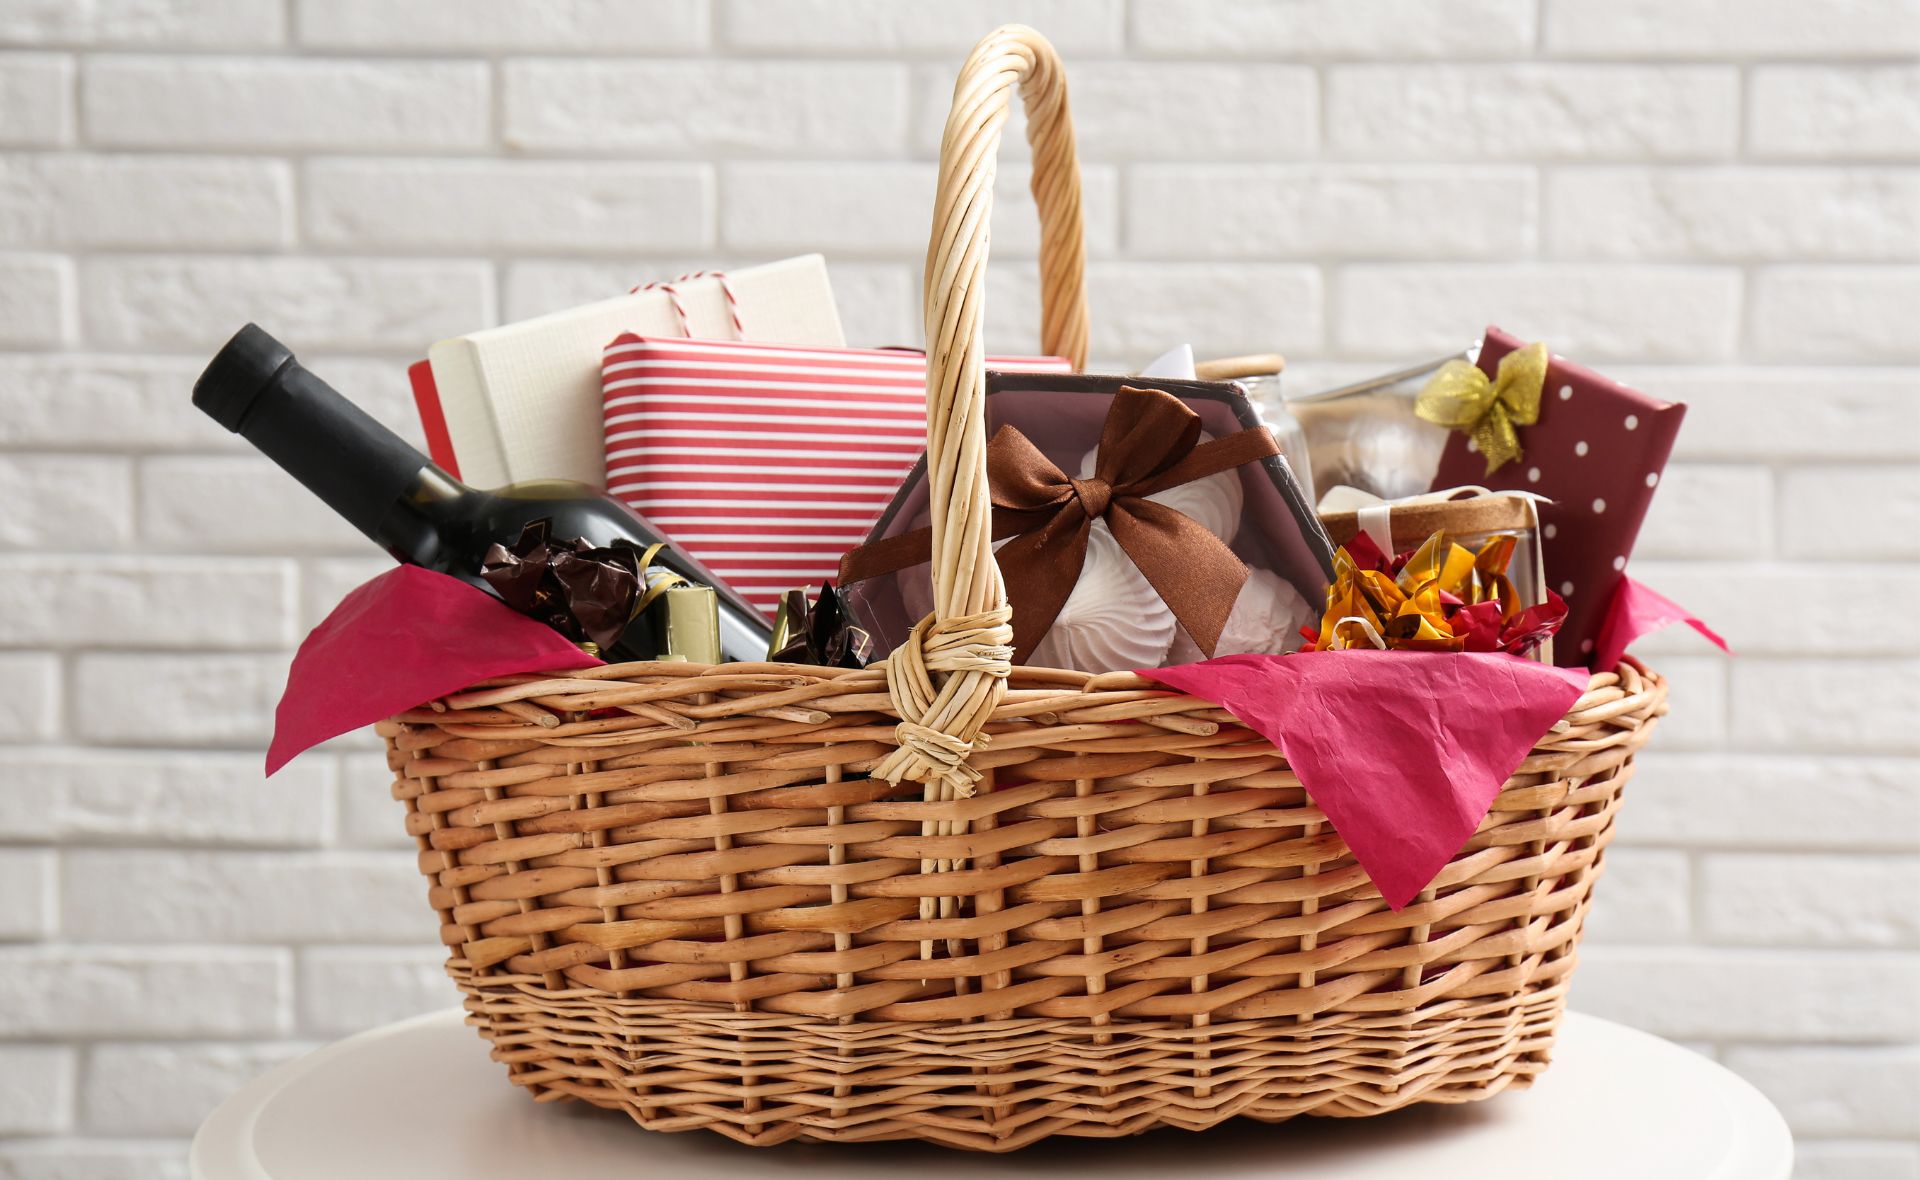 The best Christmas hampers to gift this year